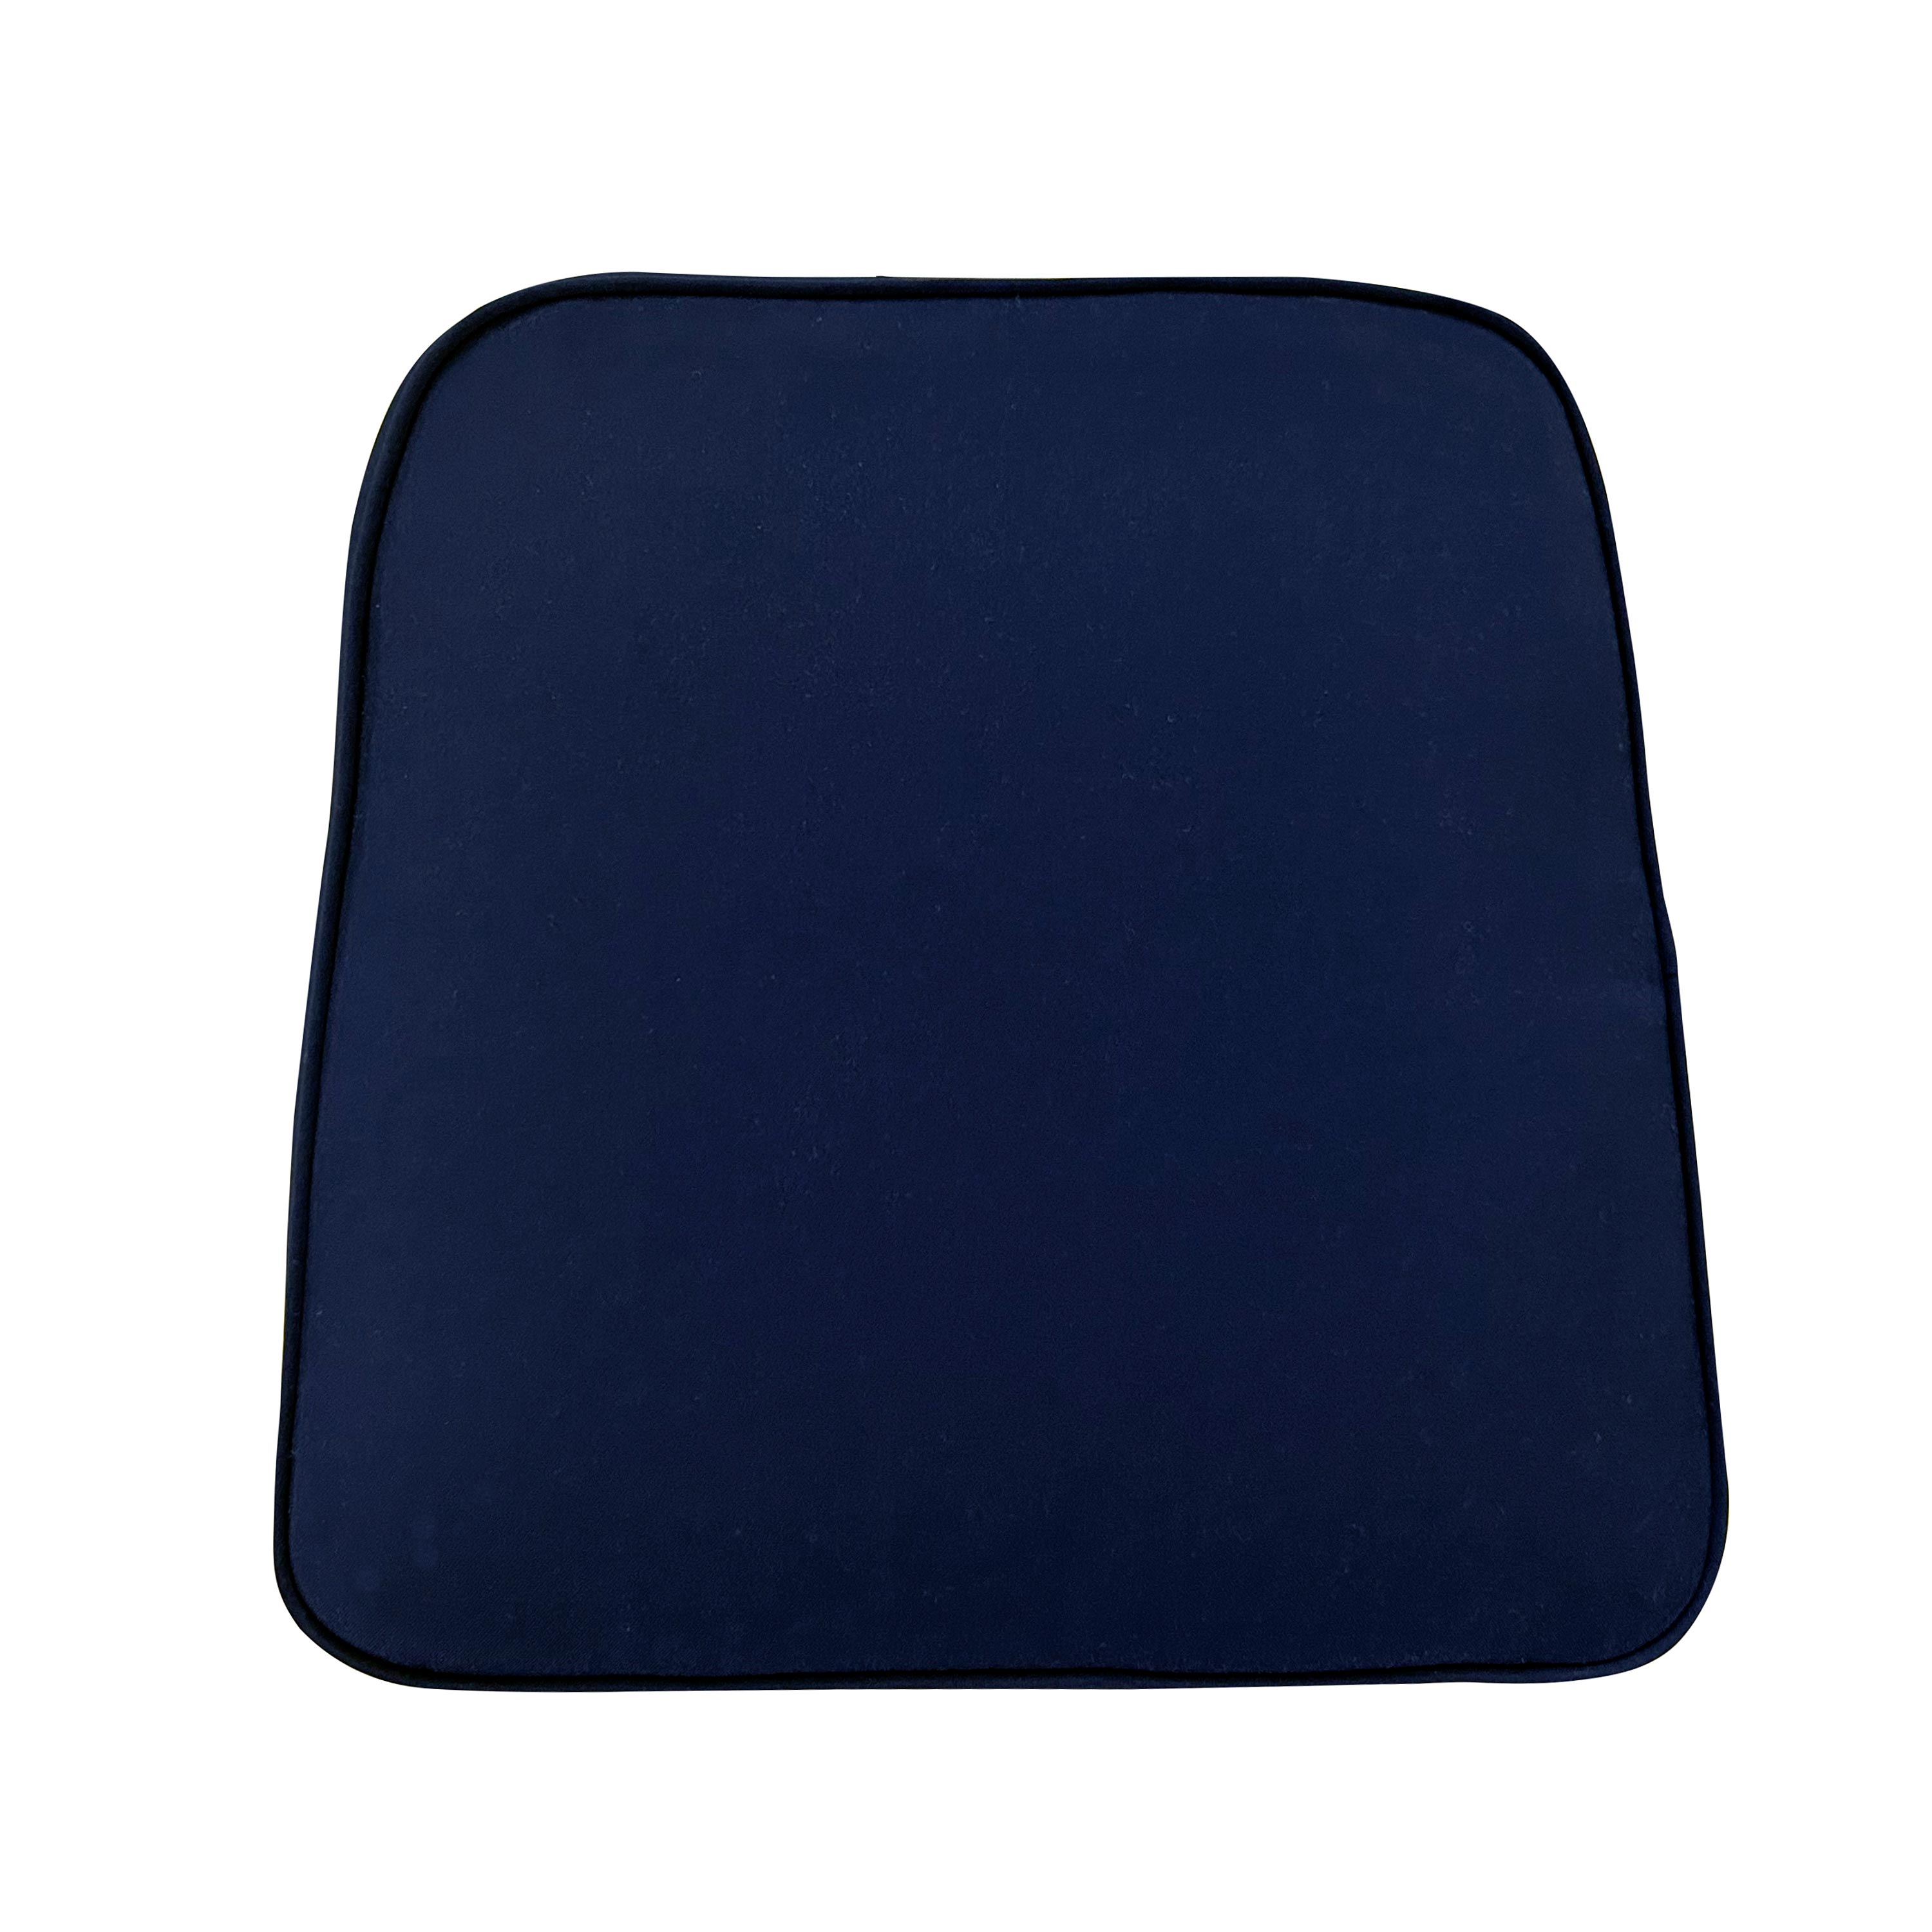 Deluxe Polyester Chair/Rocker Seat Cushion for Prospect Hill Furniture swatch image